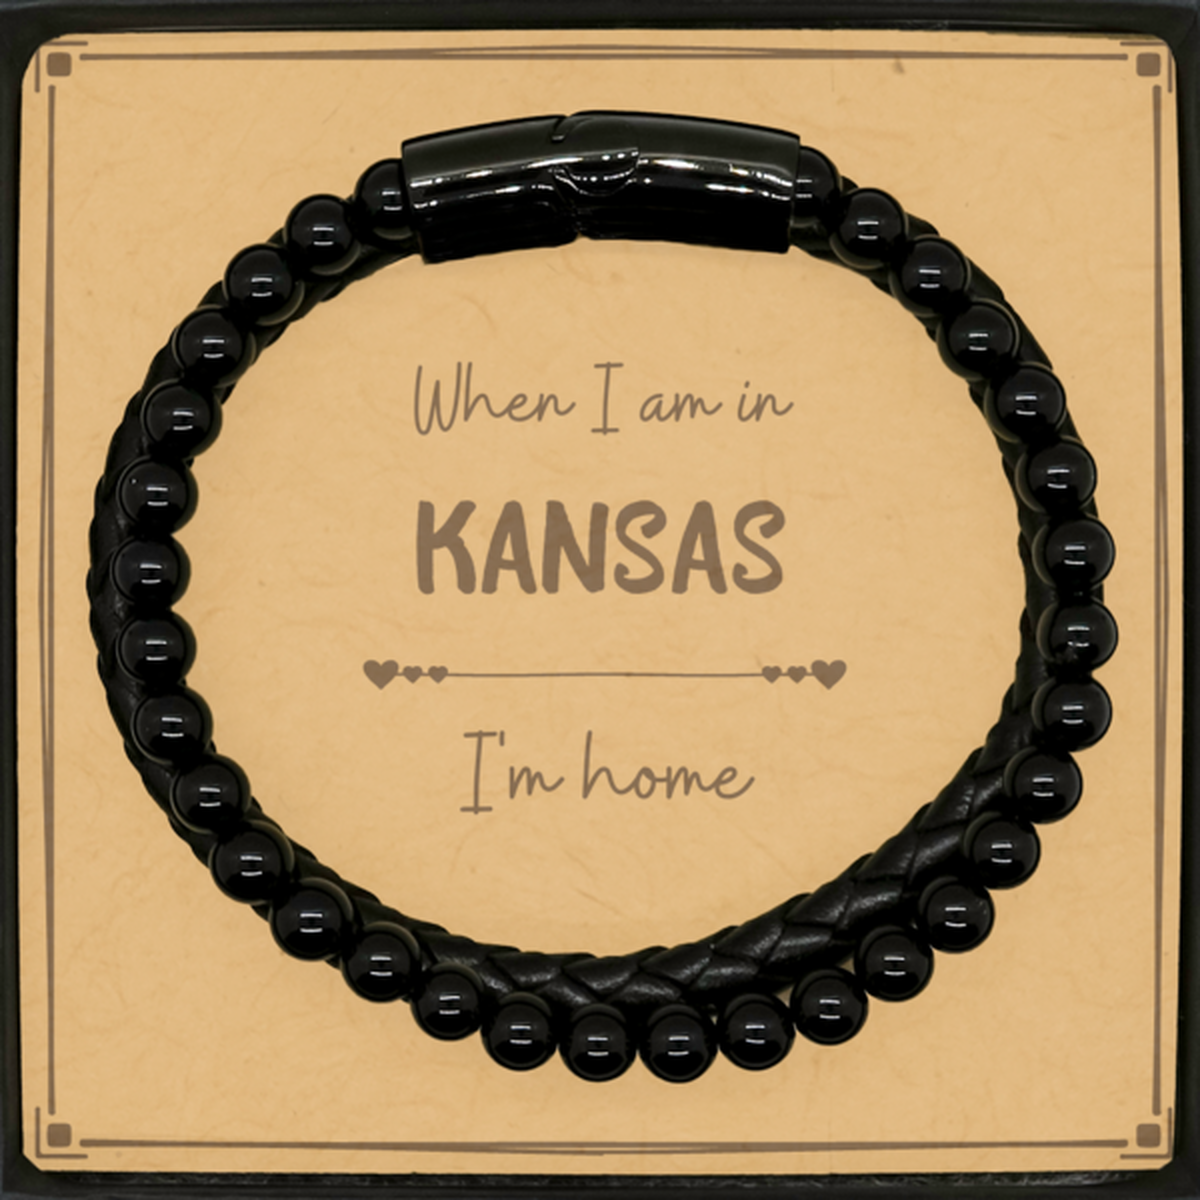 When I am in Kansas I'm home Stone Leather Bracelets, Message Card Gifts For Kansas, State Kansas Birthday Gifts for Friends Coworker